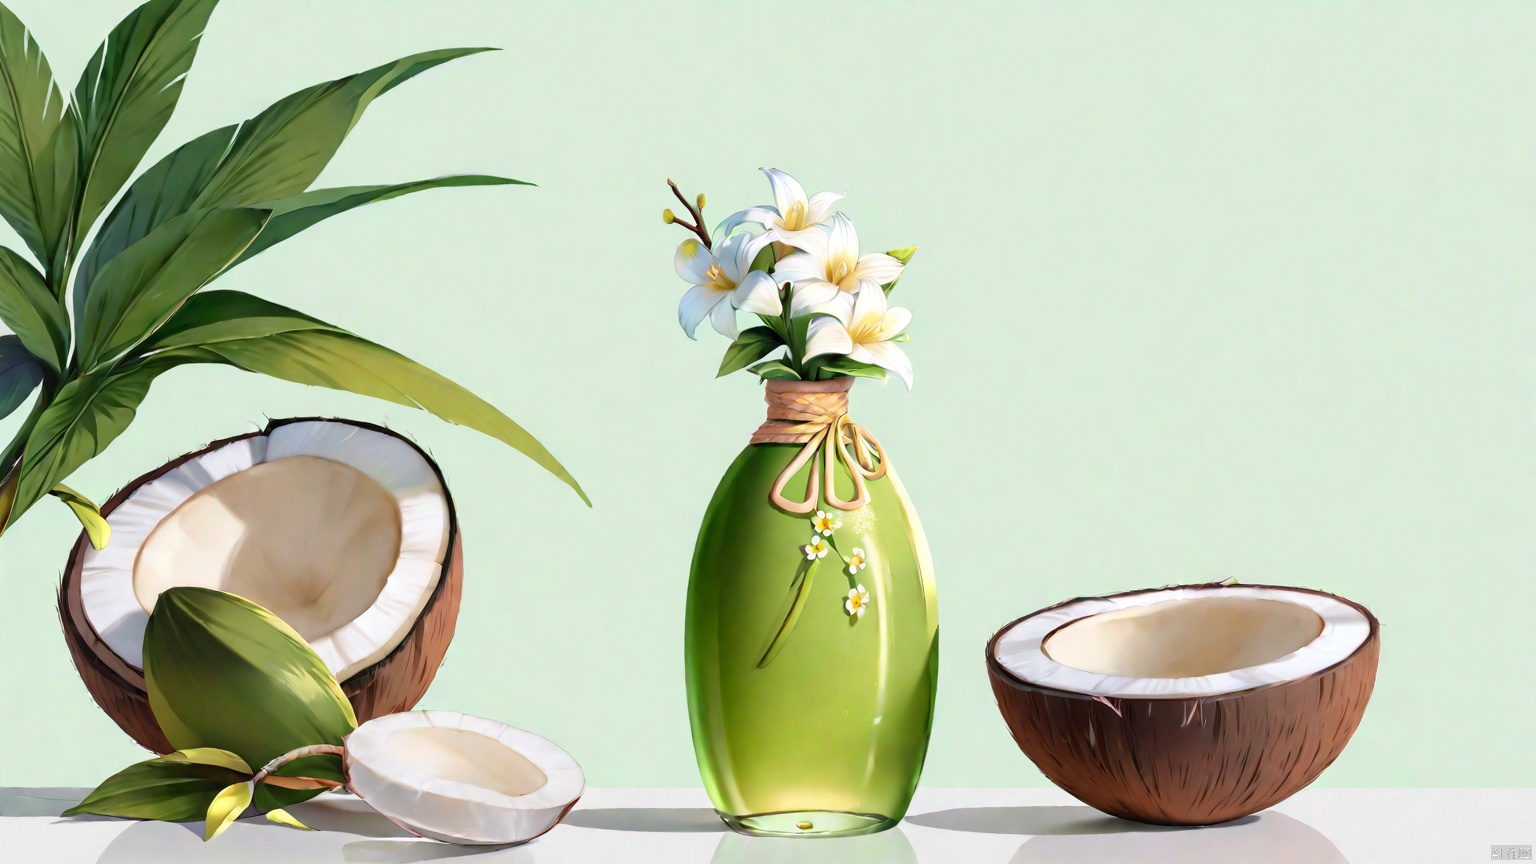  xihuwen, Light green bottle, oval bottle, left measured light, coconut, small flower decoration, wide angle, e-commerce photography, simple tree branch light background